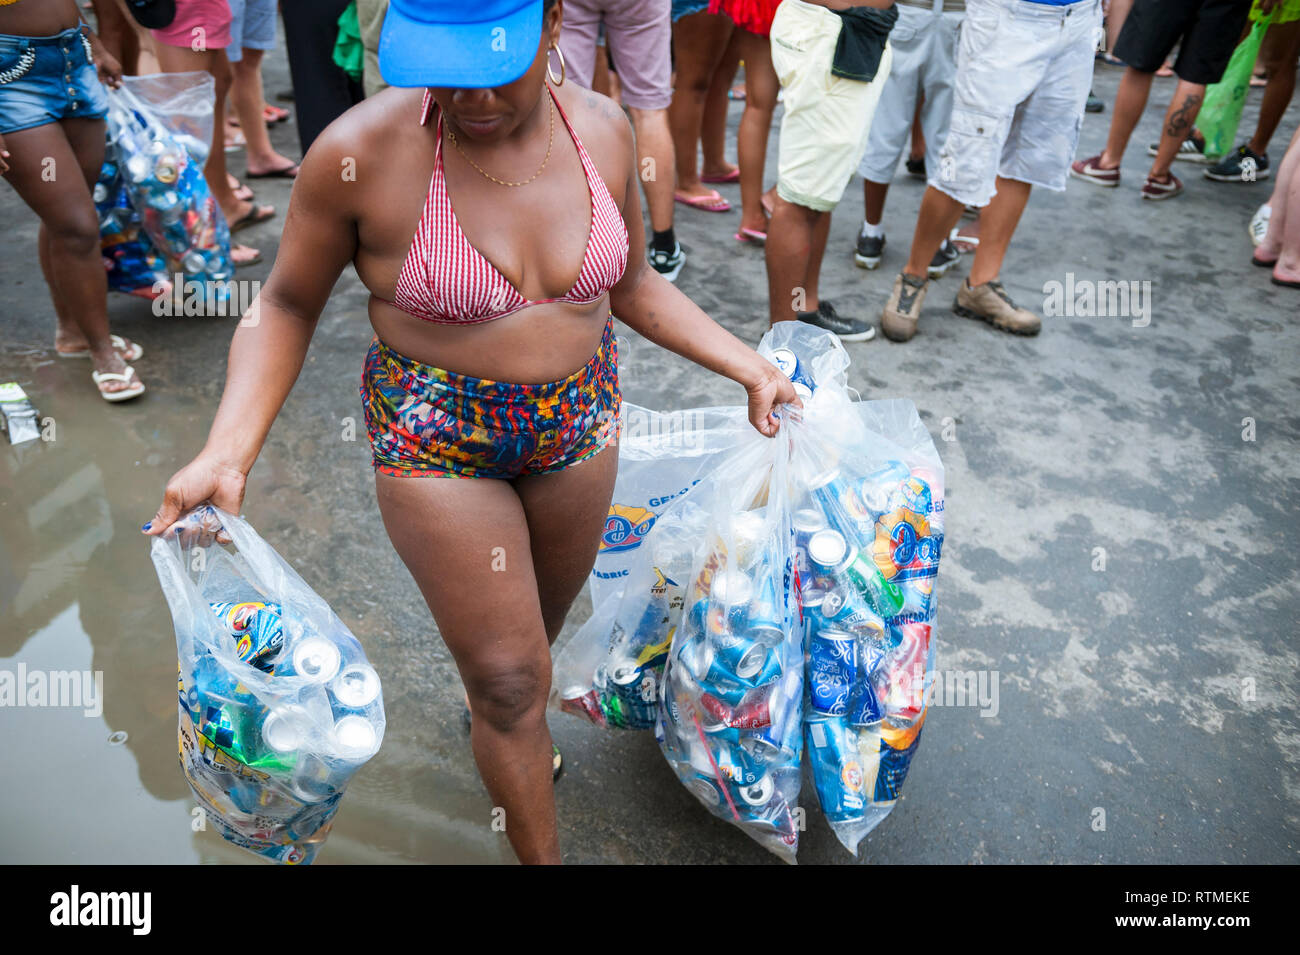 RIO DE JANEIRO - FEBRUARY 11, 2017: A Brazilian woman carries a collection of cans for recycling in the aftermath of an Ipanema Carnival street party. Stock Photo